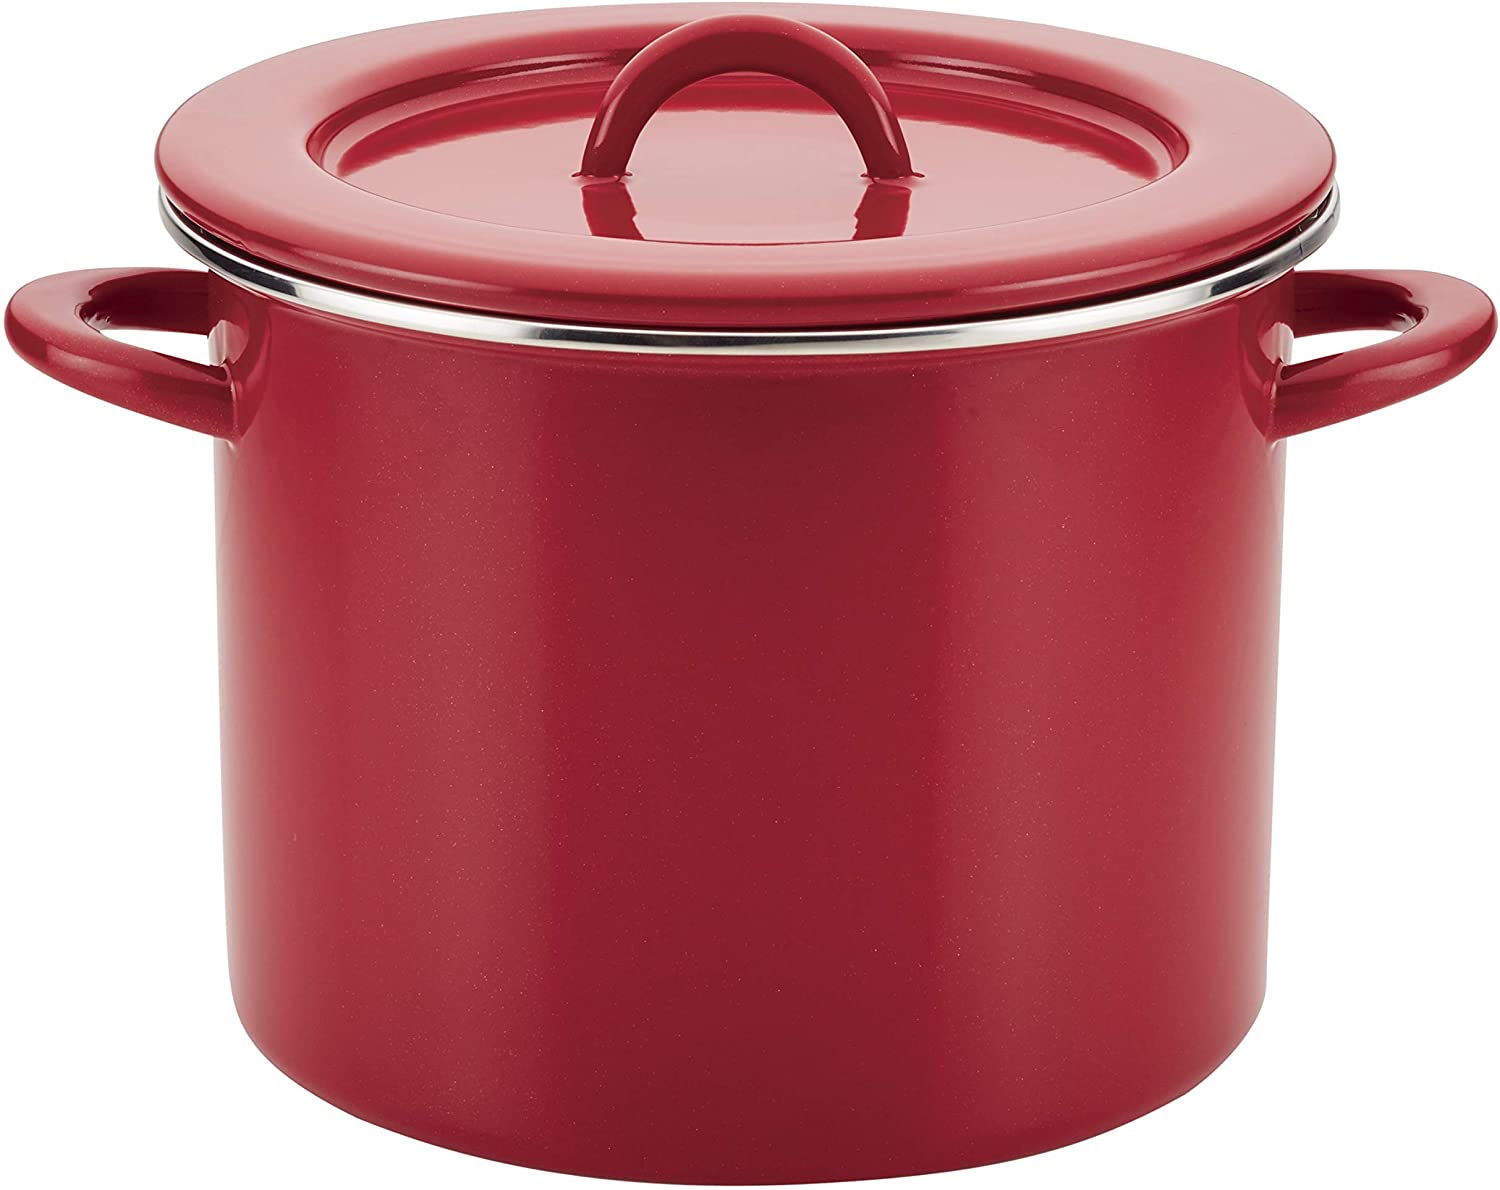 Rachael Ray 47626 Create Delicious Stock Pot/Stockpot with Lid - 12 Quart, Red